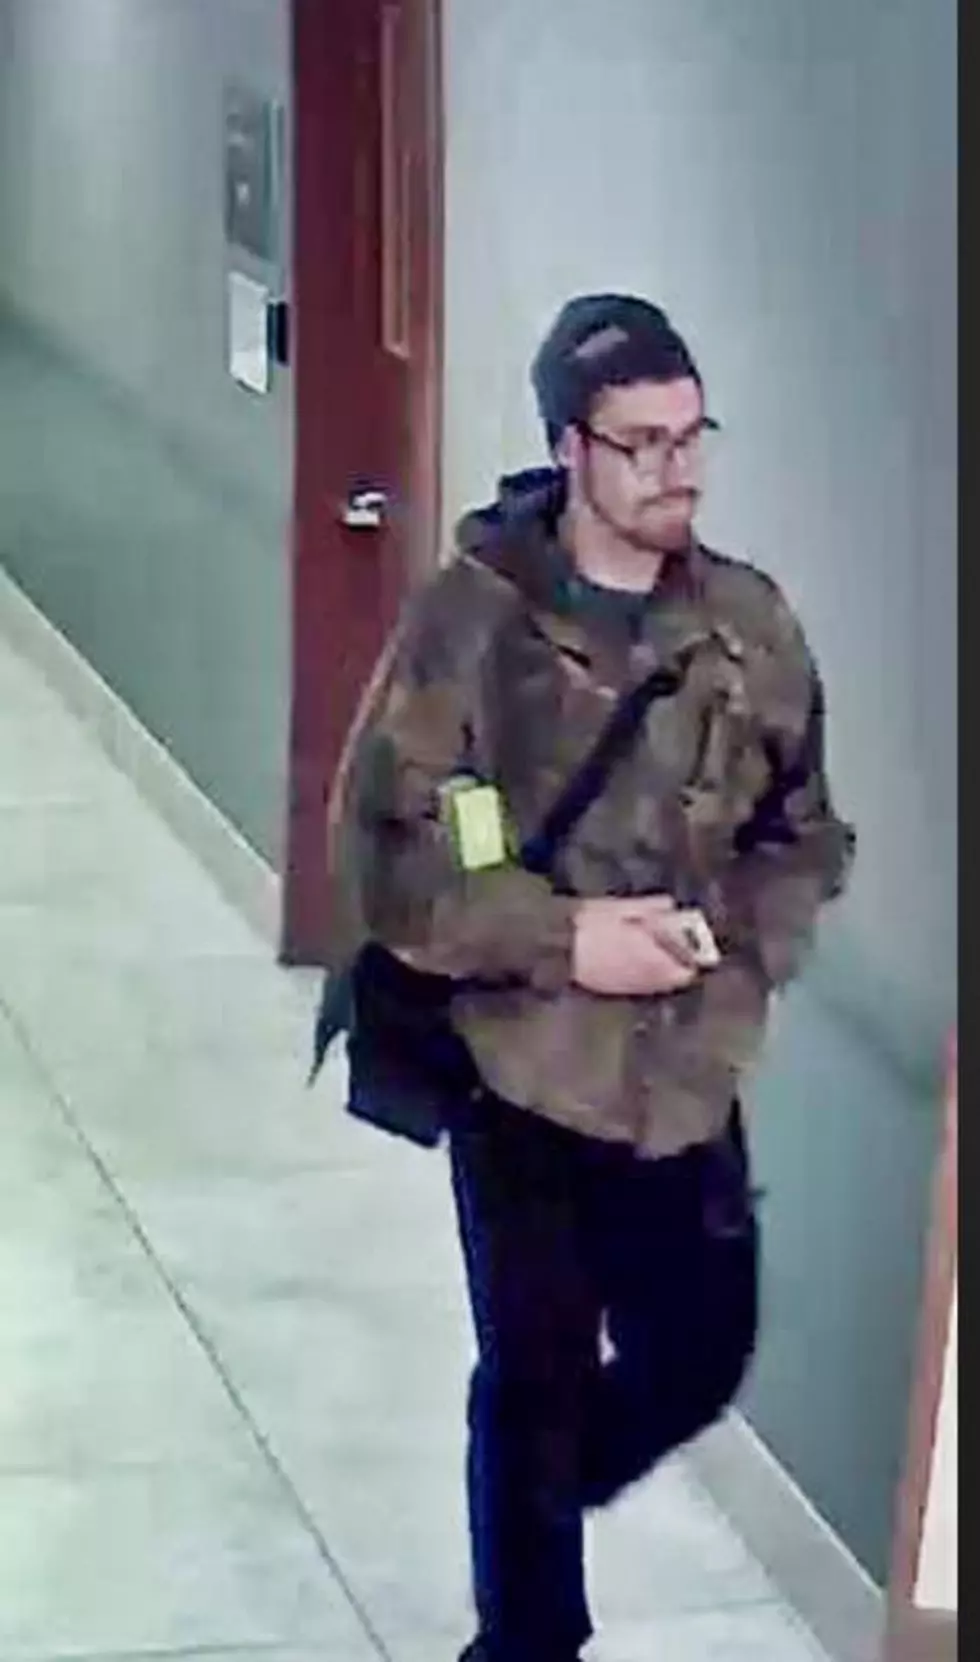 Duluth Police Seek Information On Individual Wanted For Questioning In Regards To Downtown Theft Incident